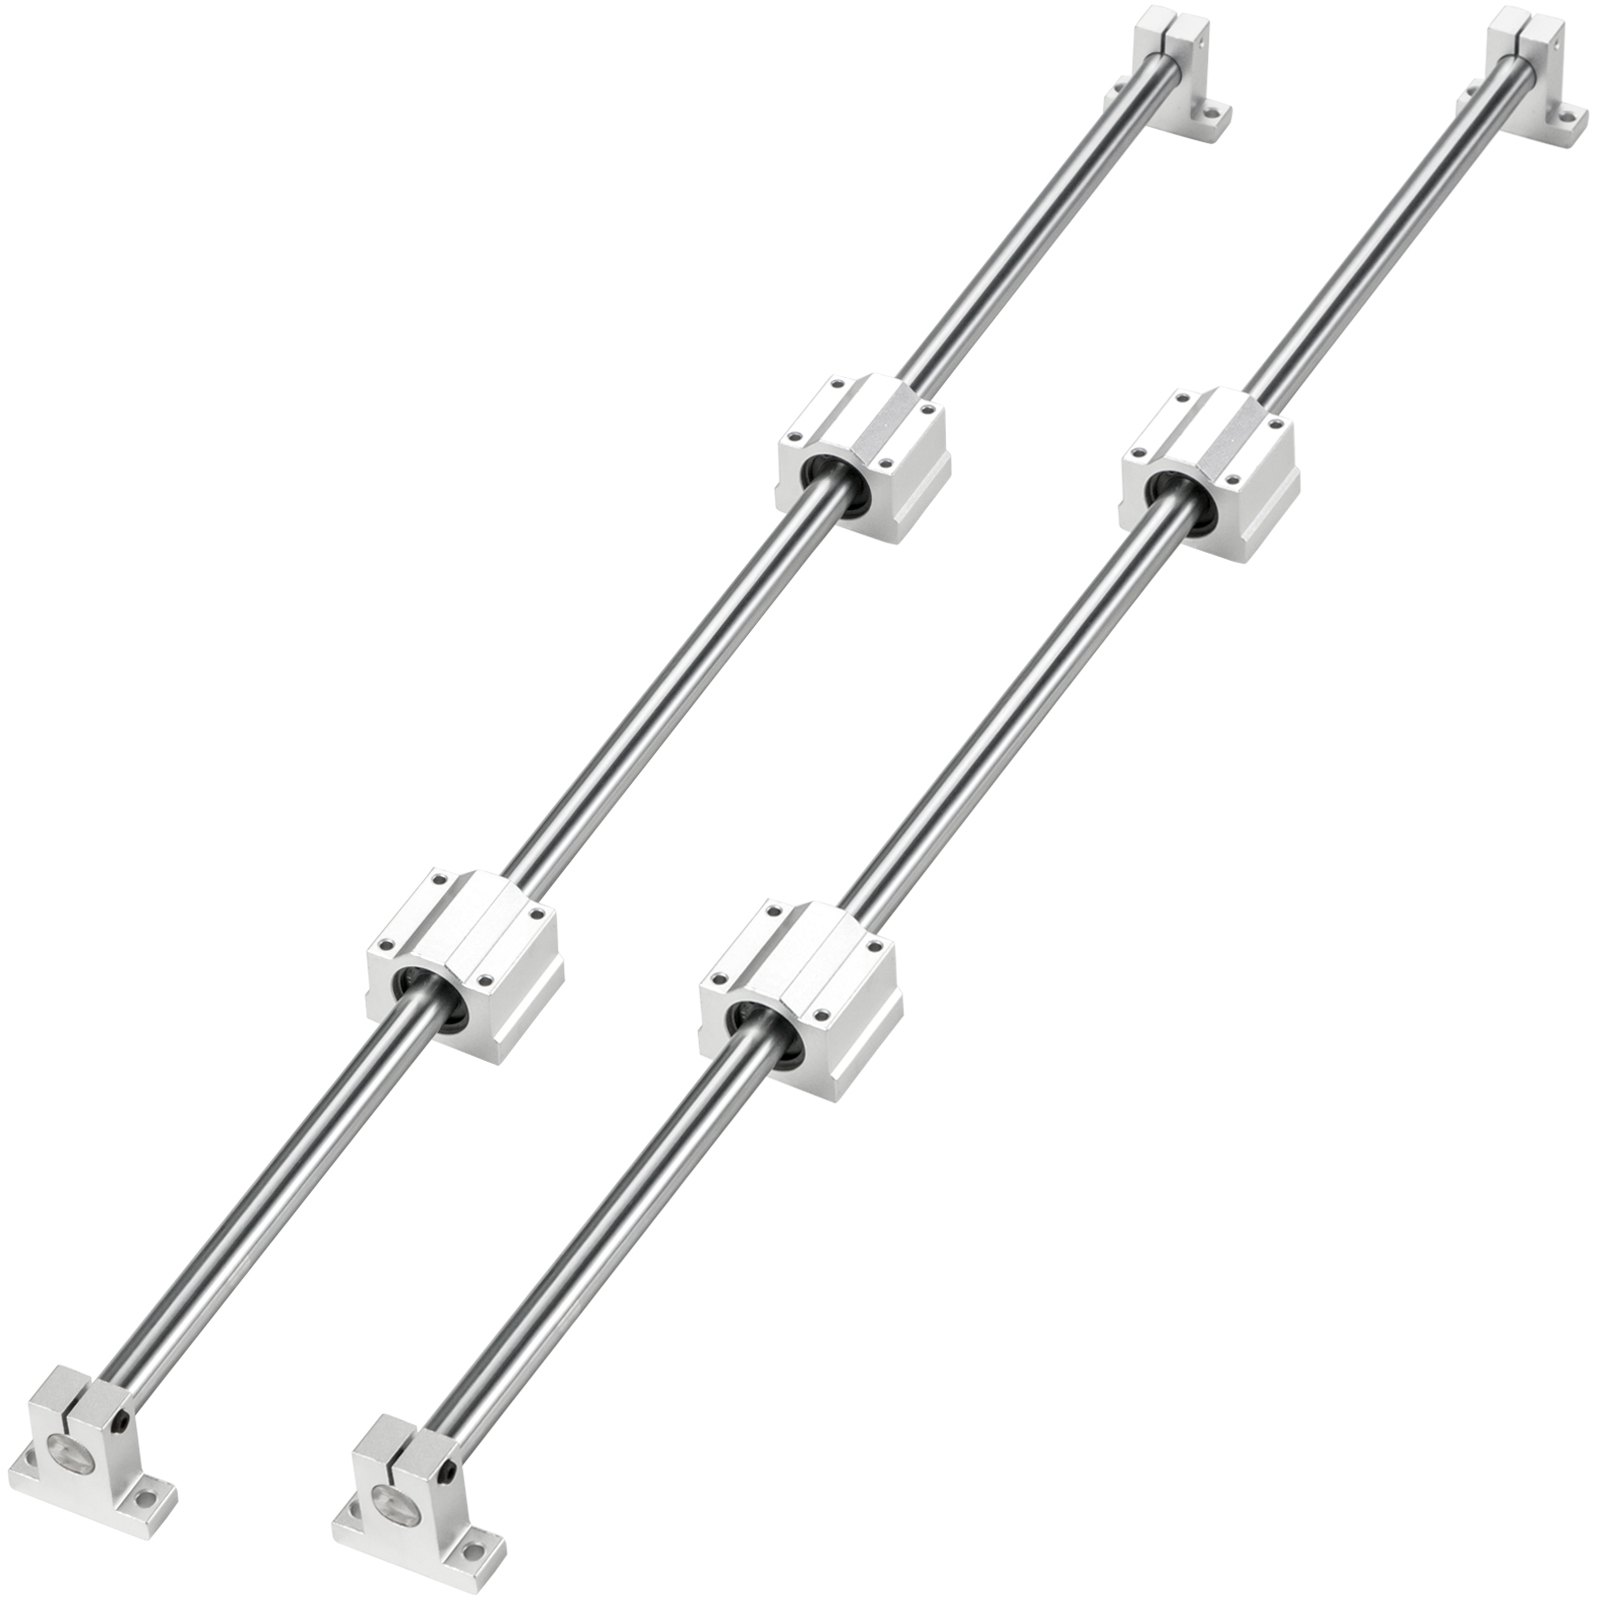 Optical Axis 16mm 500mm Linear Rail Shaft Rod With Bearing Block & Guide Support от Vevor Many GEOs